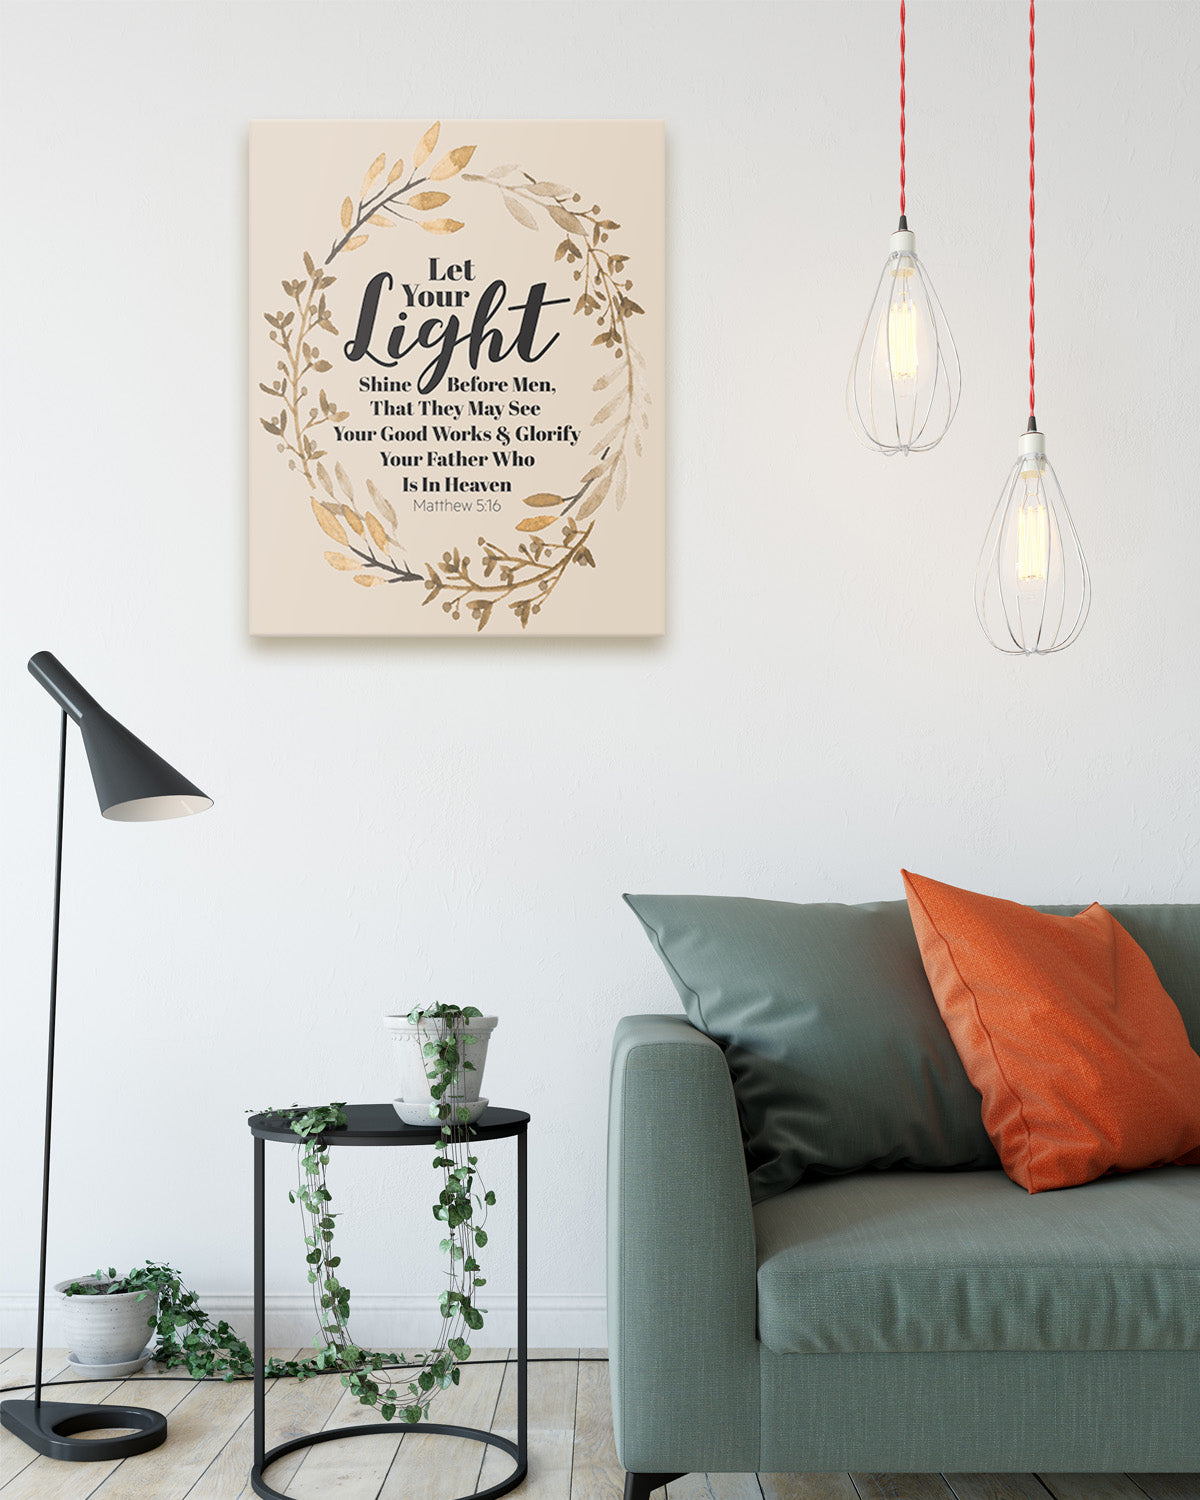 Govivo Let Your Light Shine Matthew 5:16 bible verse decor - Christian inspirational wall decor - Scripture quote home decor gifts for women, girls, men and boys